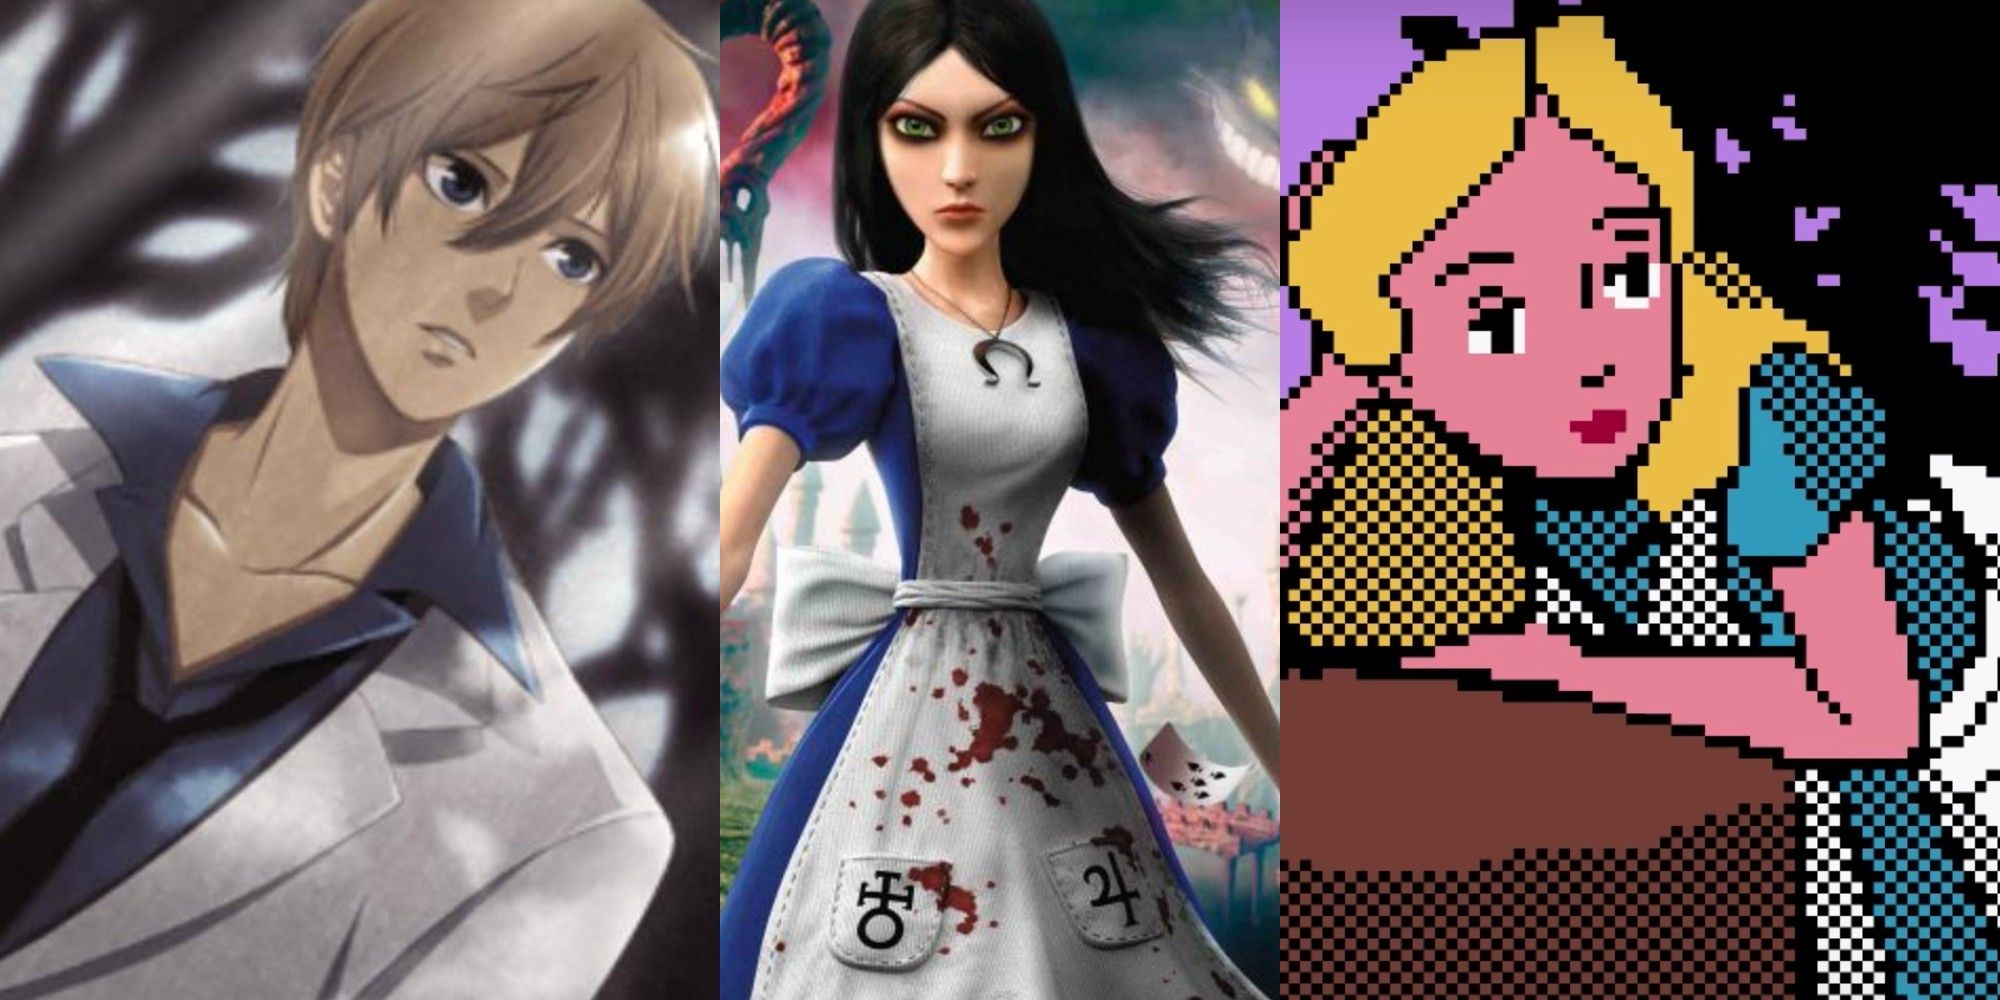 GameSpot - Alice: Madness Returns Best Graphics, Artistic Winner Video:   Other Nominees: Child of Eden - El Shaddai -  Rayman Origins - Stacking